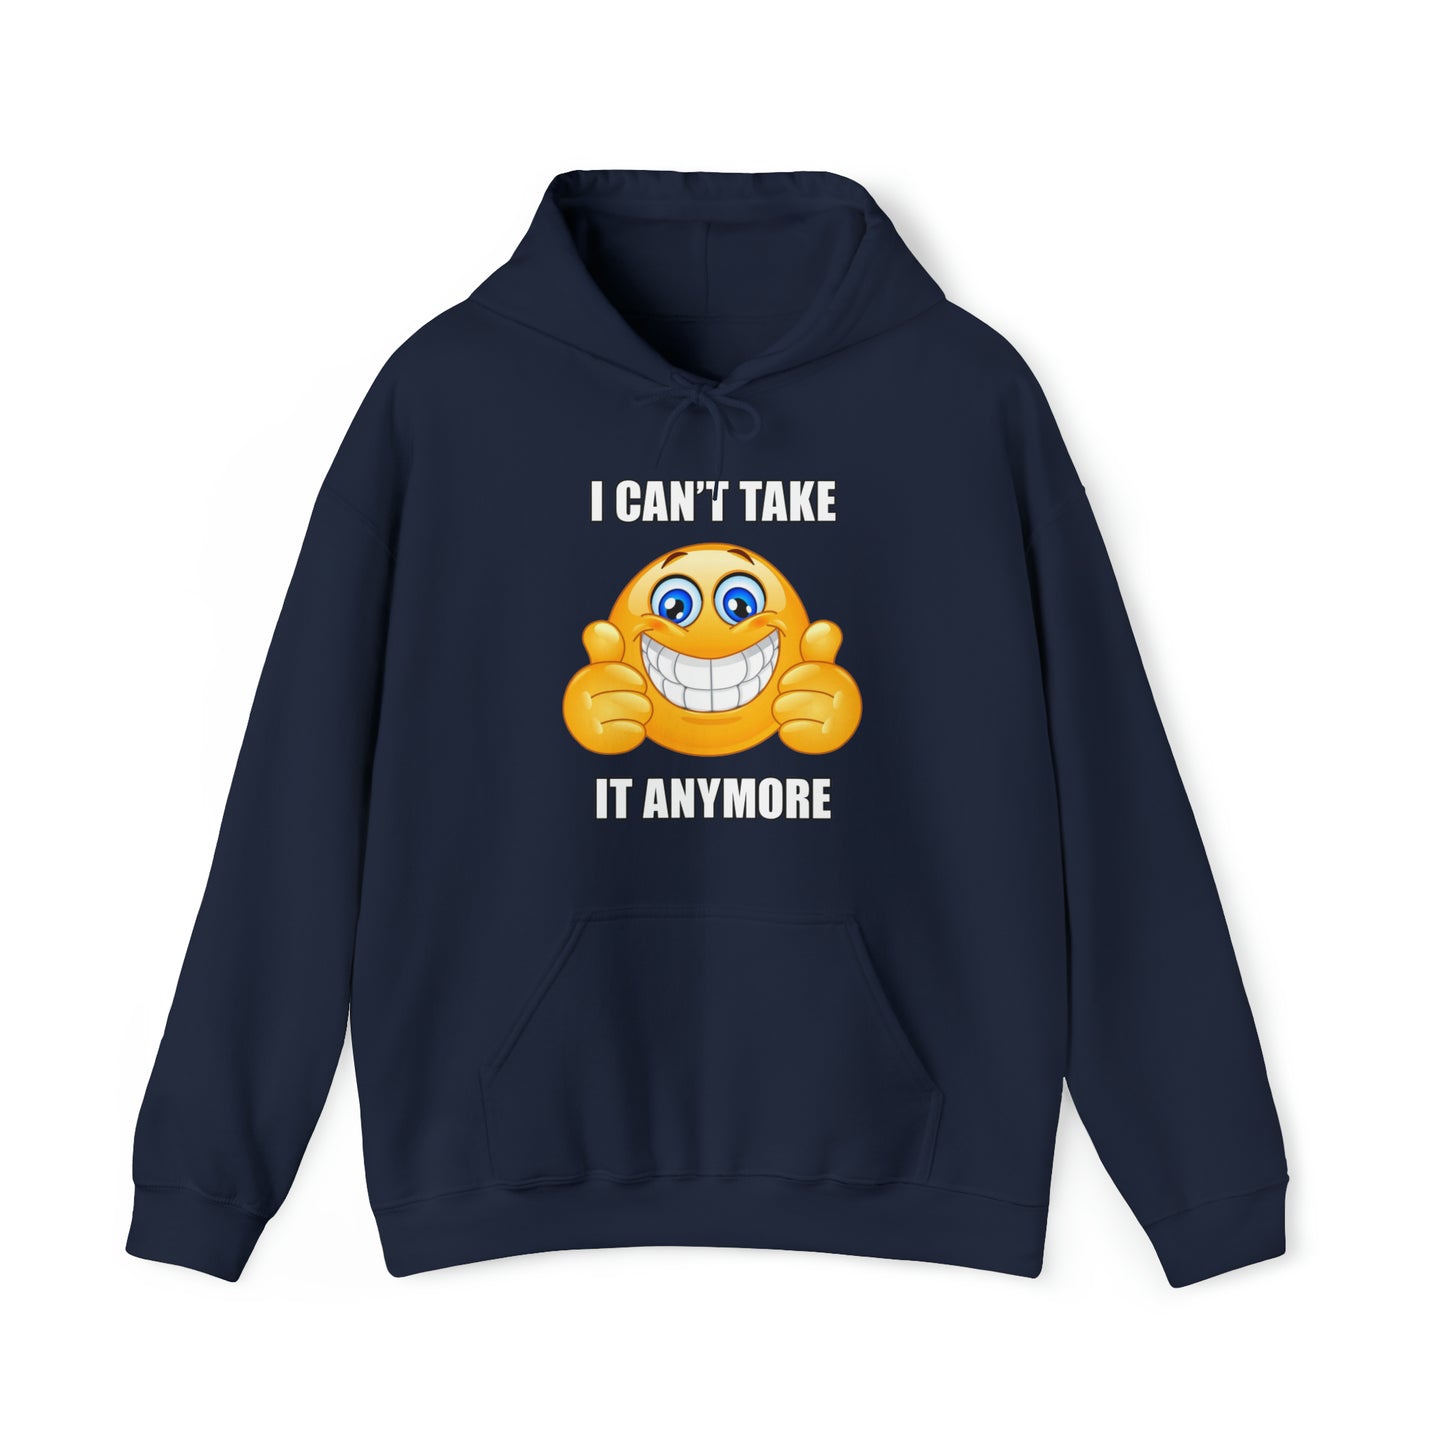 I Can't Take It Anymore Hoodie